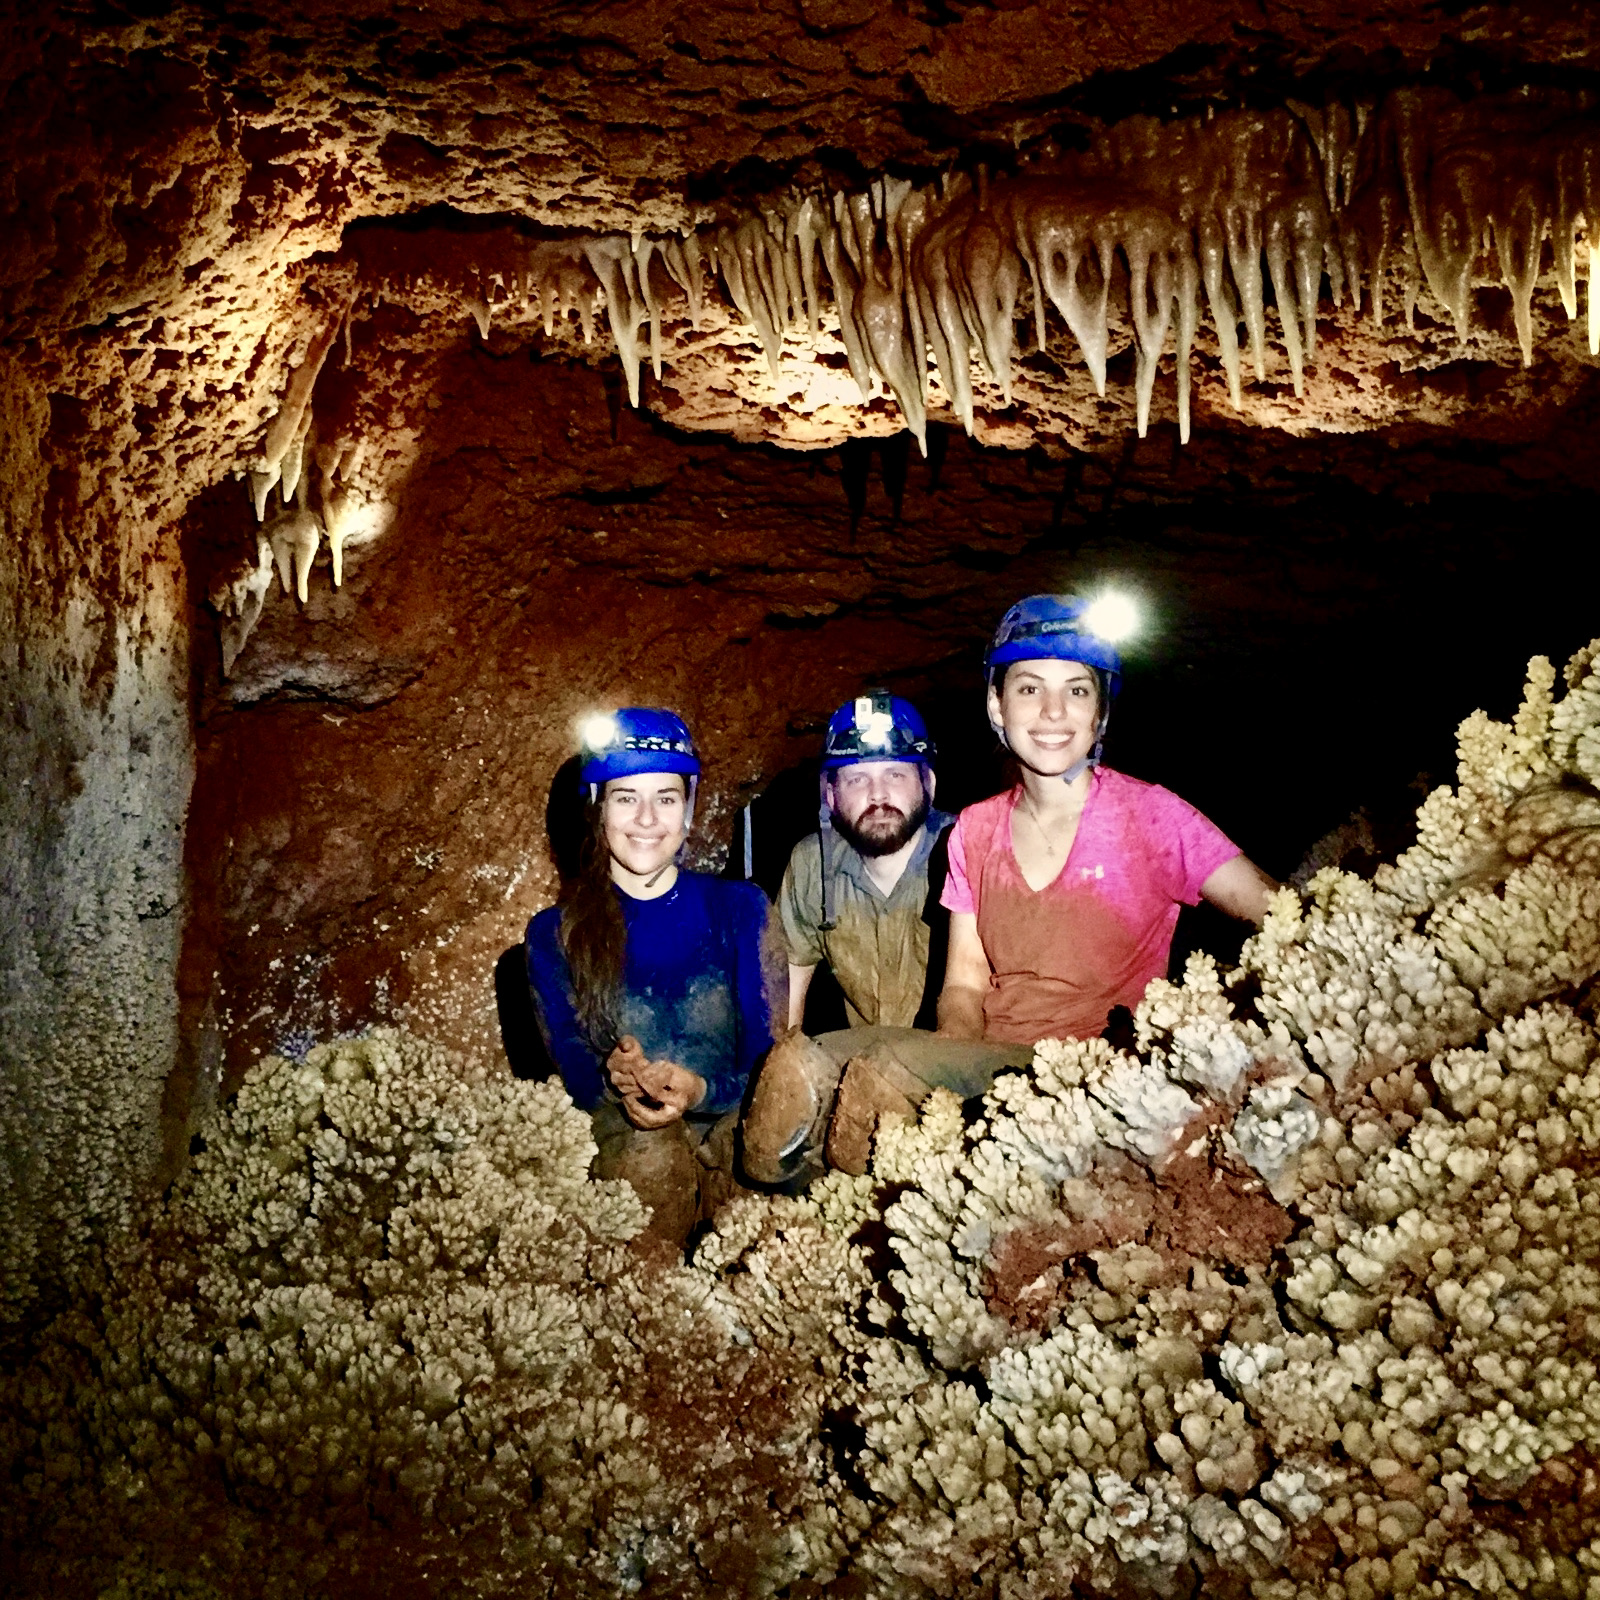 Dr. Chris Maupin, Audrey Housson ’16, and Lorraine McChesney ’16 half a mile underground in a Williamson County cave. (Photo by Chris Maupin)